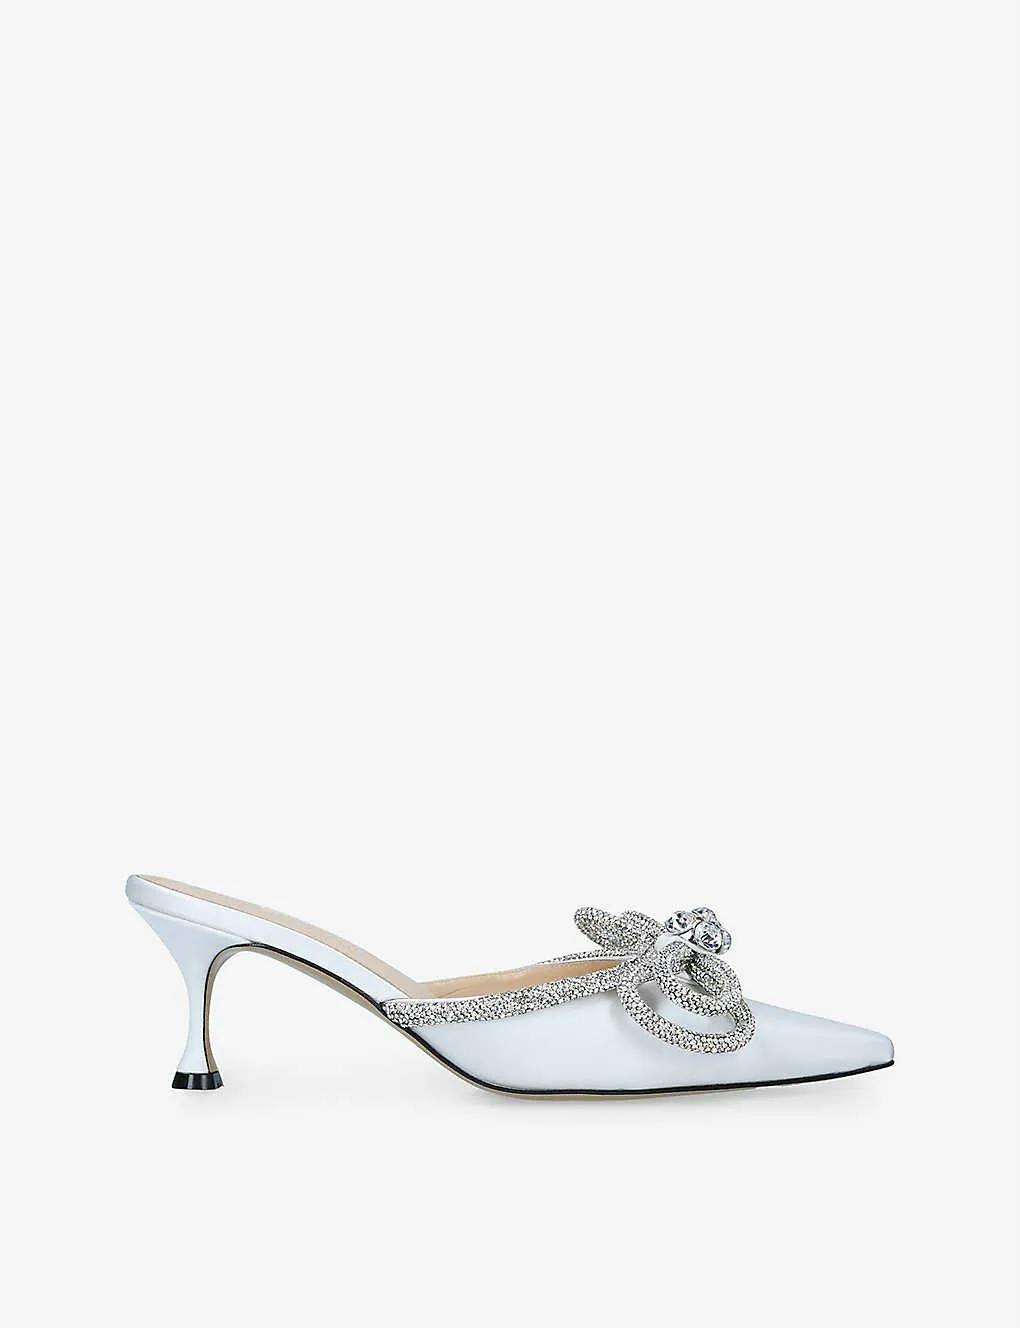 A stylish white satin mule with a pointed toe and a low, thin heel. The shoe features an elegant jeweled bow embellishment on the top, adorned with sparkling crystals. The background is plain white.